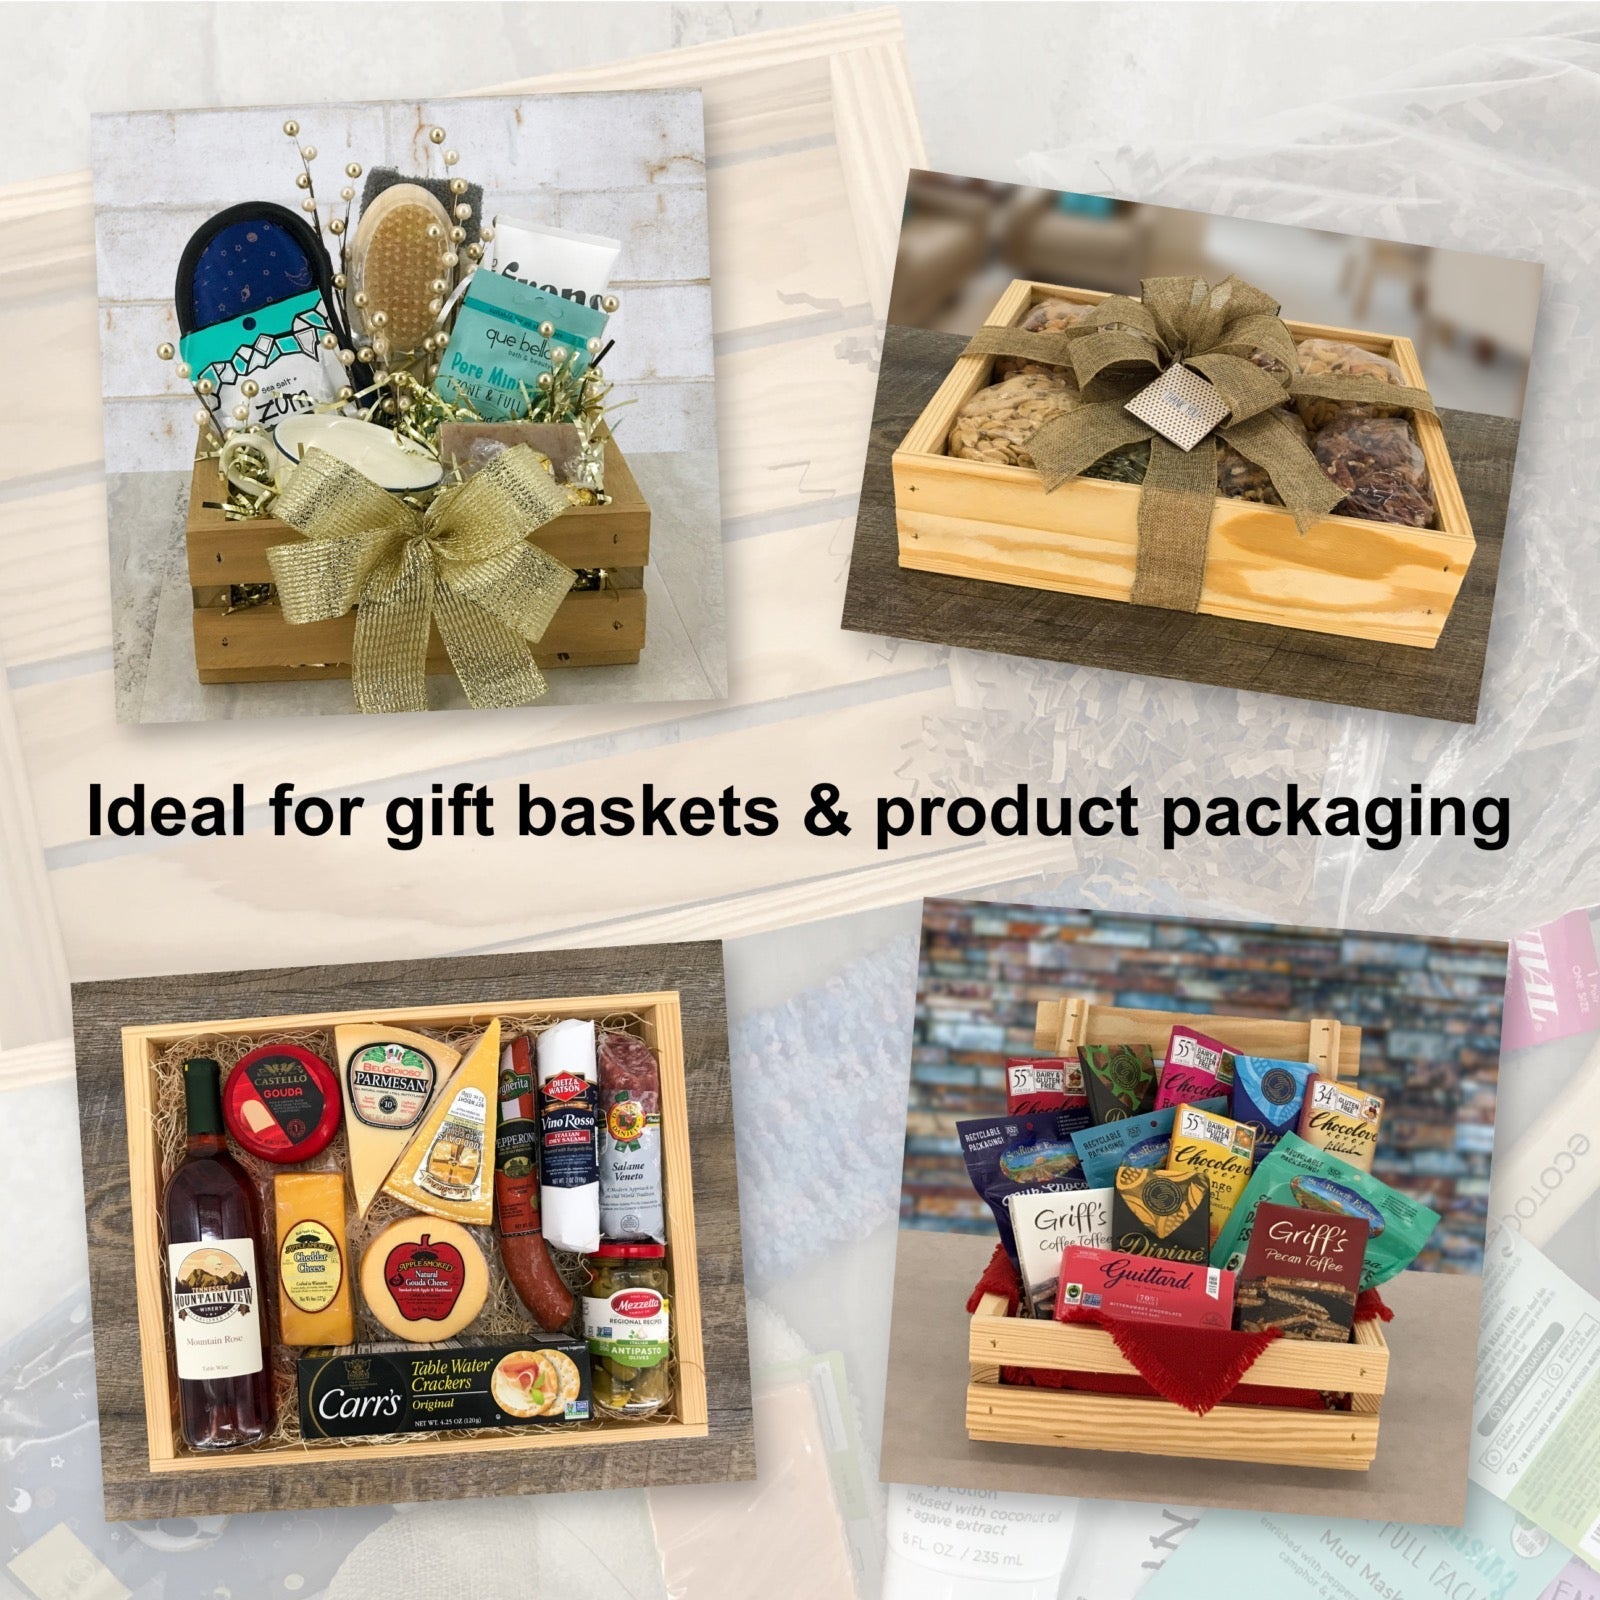 Ideal for gift baskets and product packaging, B2-14.375-10.78125-4.3125-ST-NW-NL, 6-B2-14.375-10.78125-4.3125-ST-NW-NL, 12-B2-14.375-10.78125-4.3125-ST-NW-NL, 24-B2-14.375-10.78125-4.3125-ST-NW-NL, 48-B2-14.375-10.78125-4.3125-ST-NW-NL, 96-B2-14.375-10.78125-4.3125-ST-NW-NL